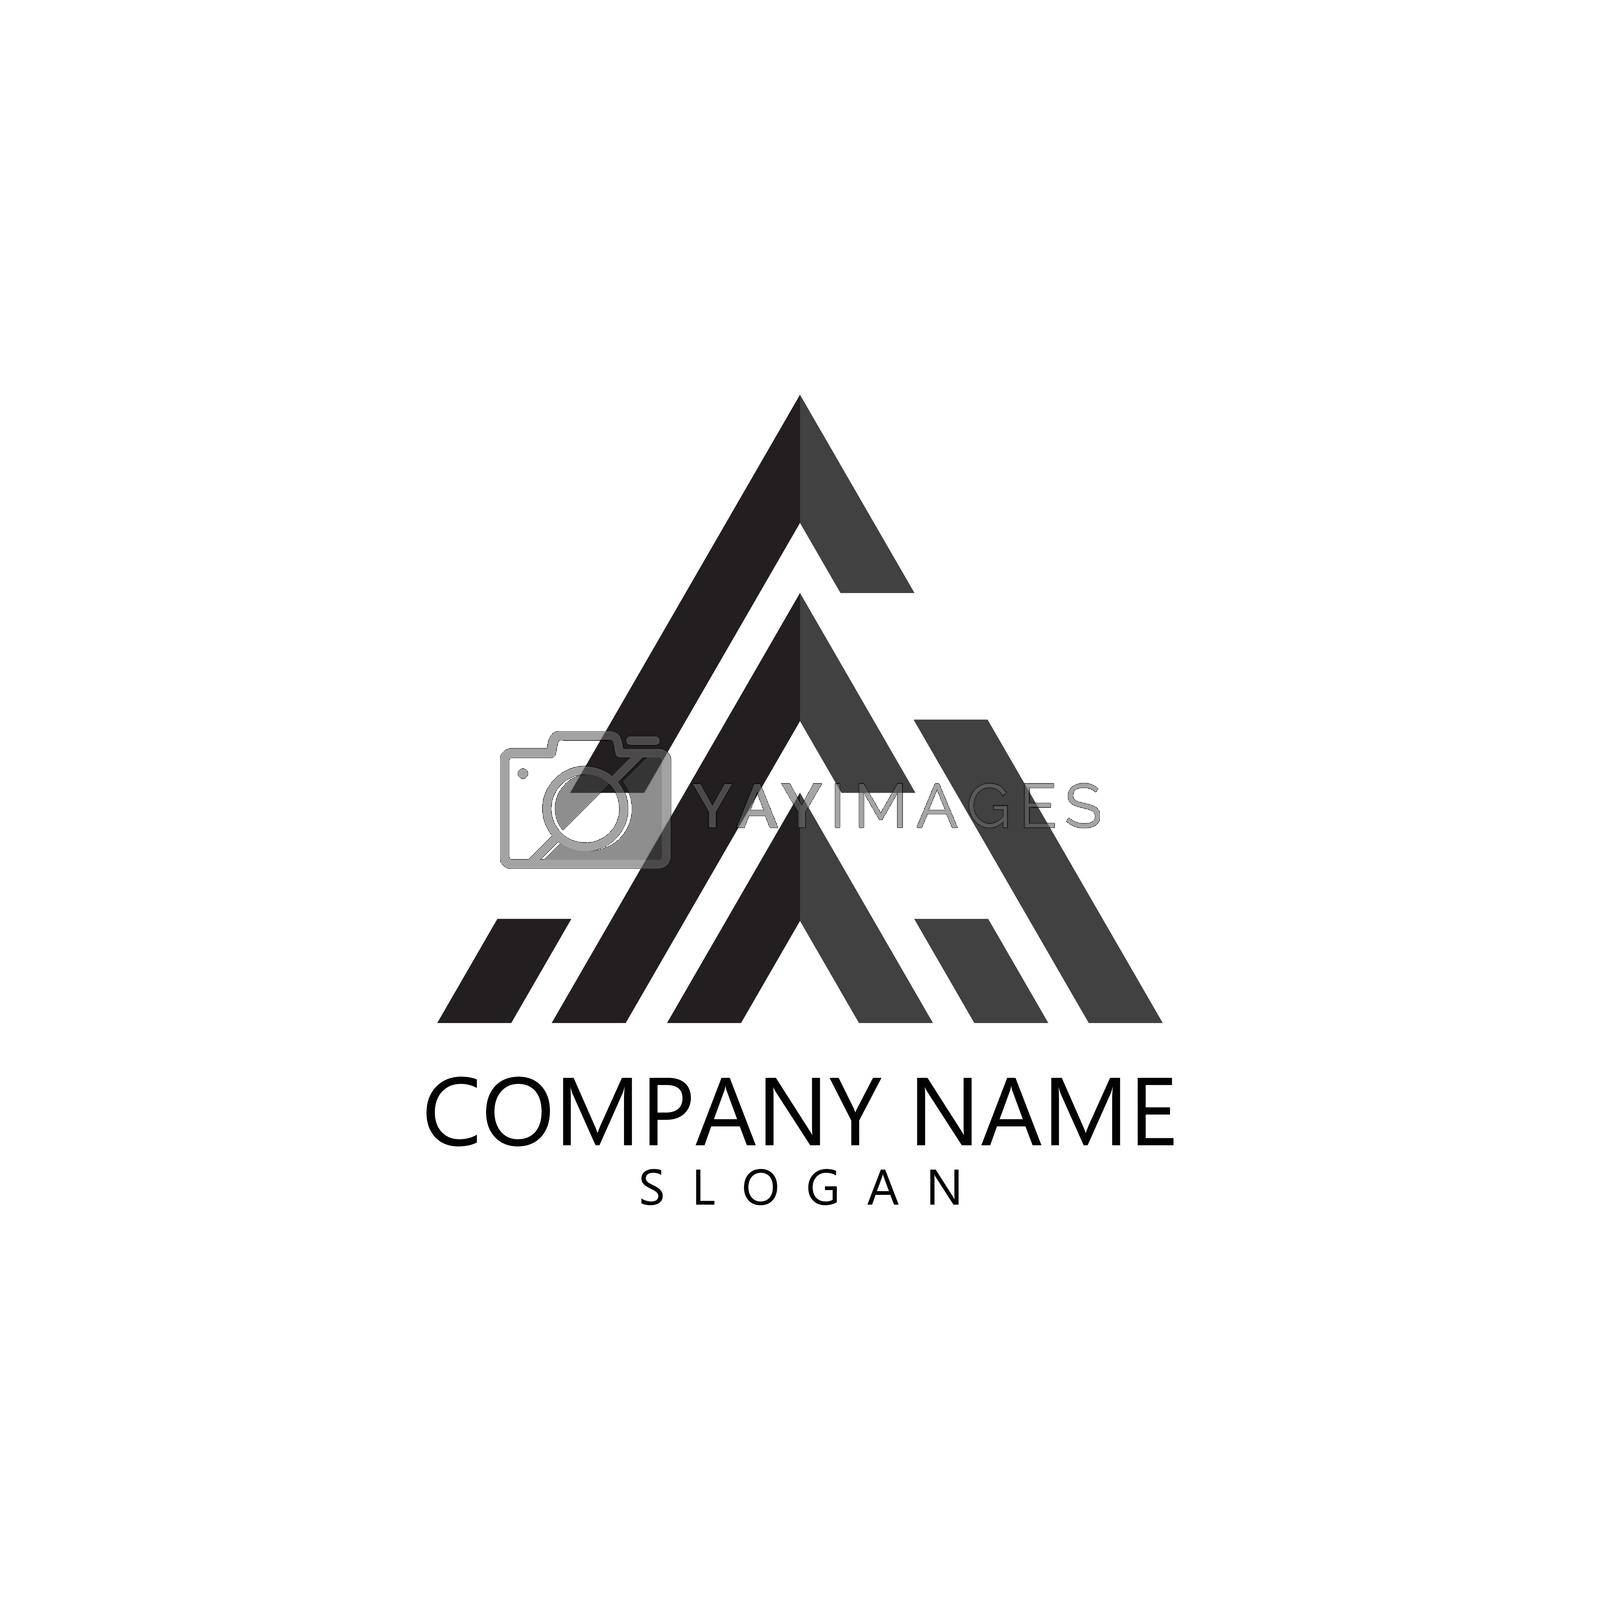 Royalty free image of Pyramid Logo Template by hasan02